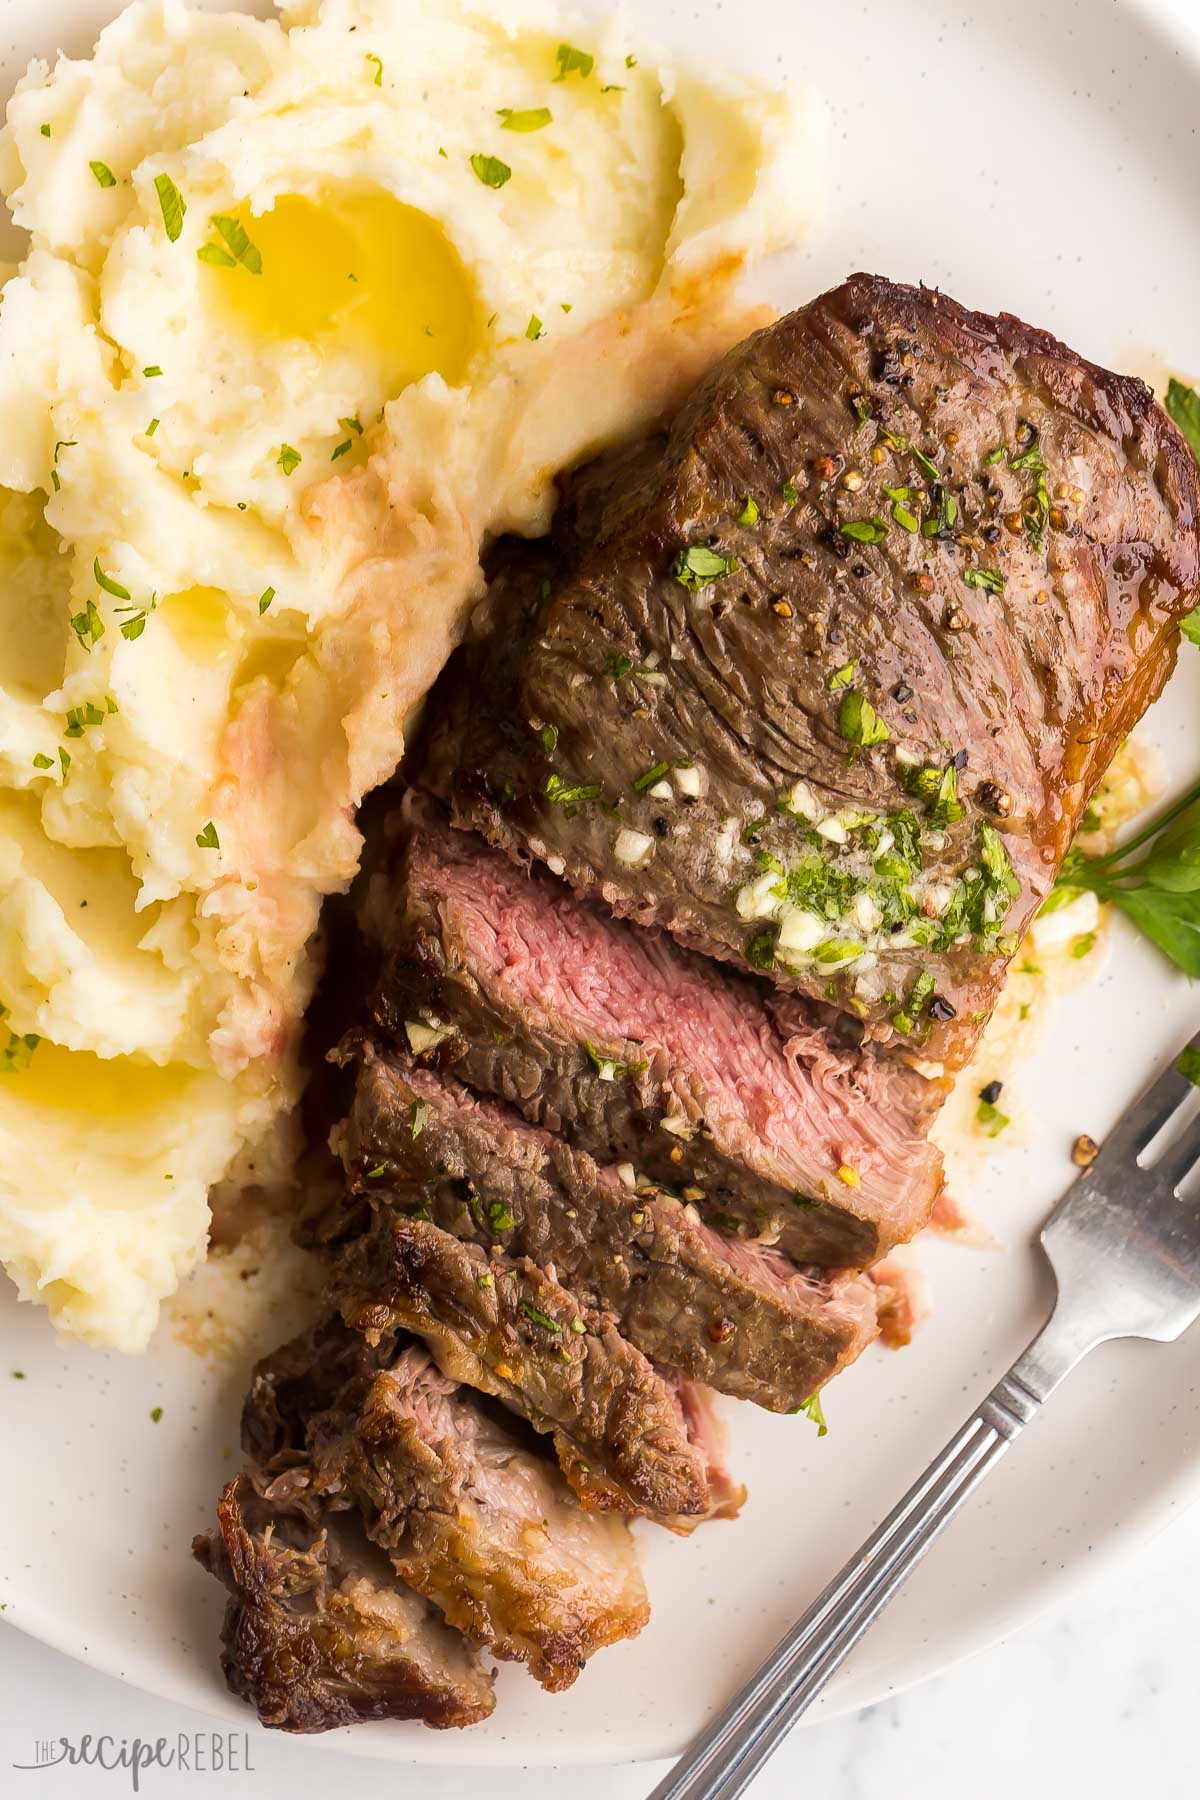 mashed potatoes on the side and sliced steak with garlic butter